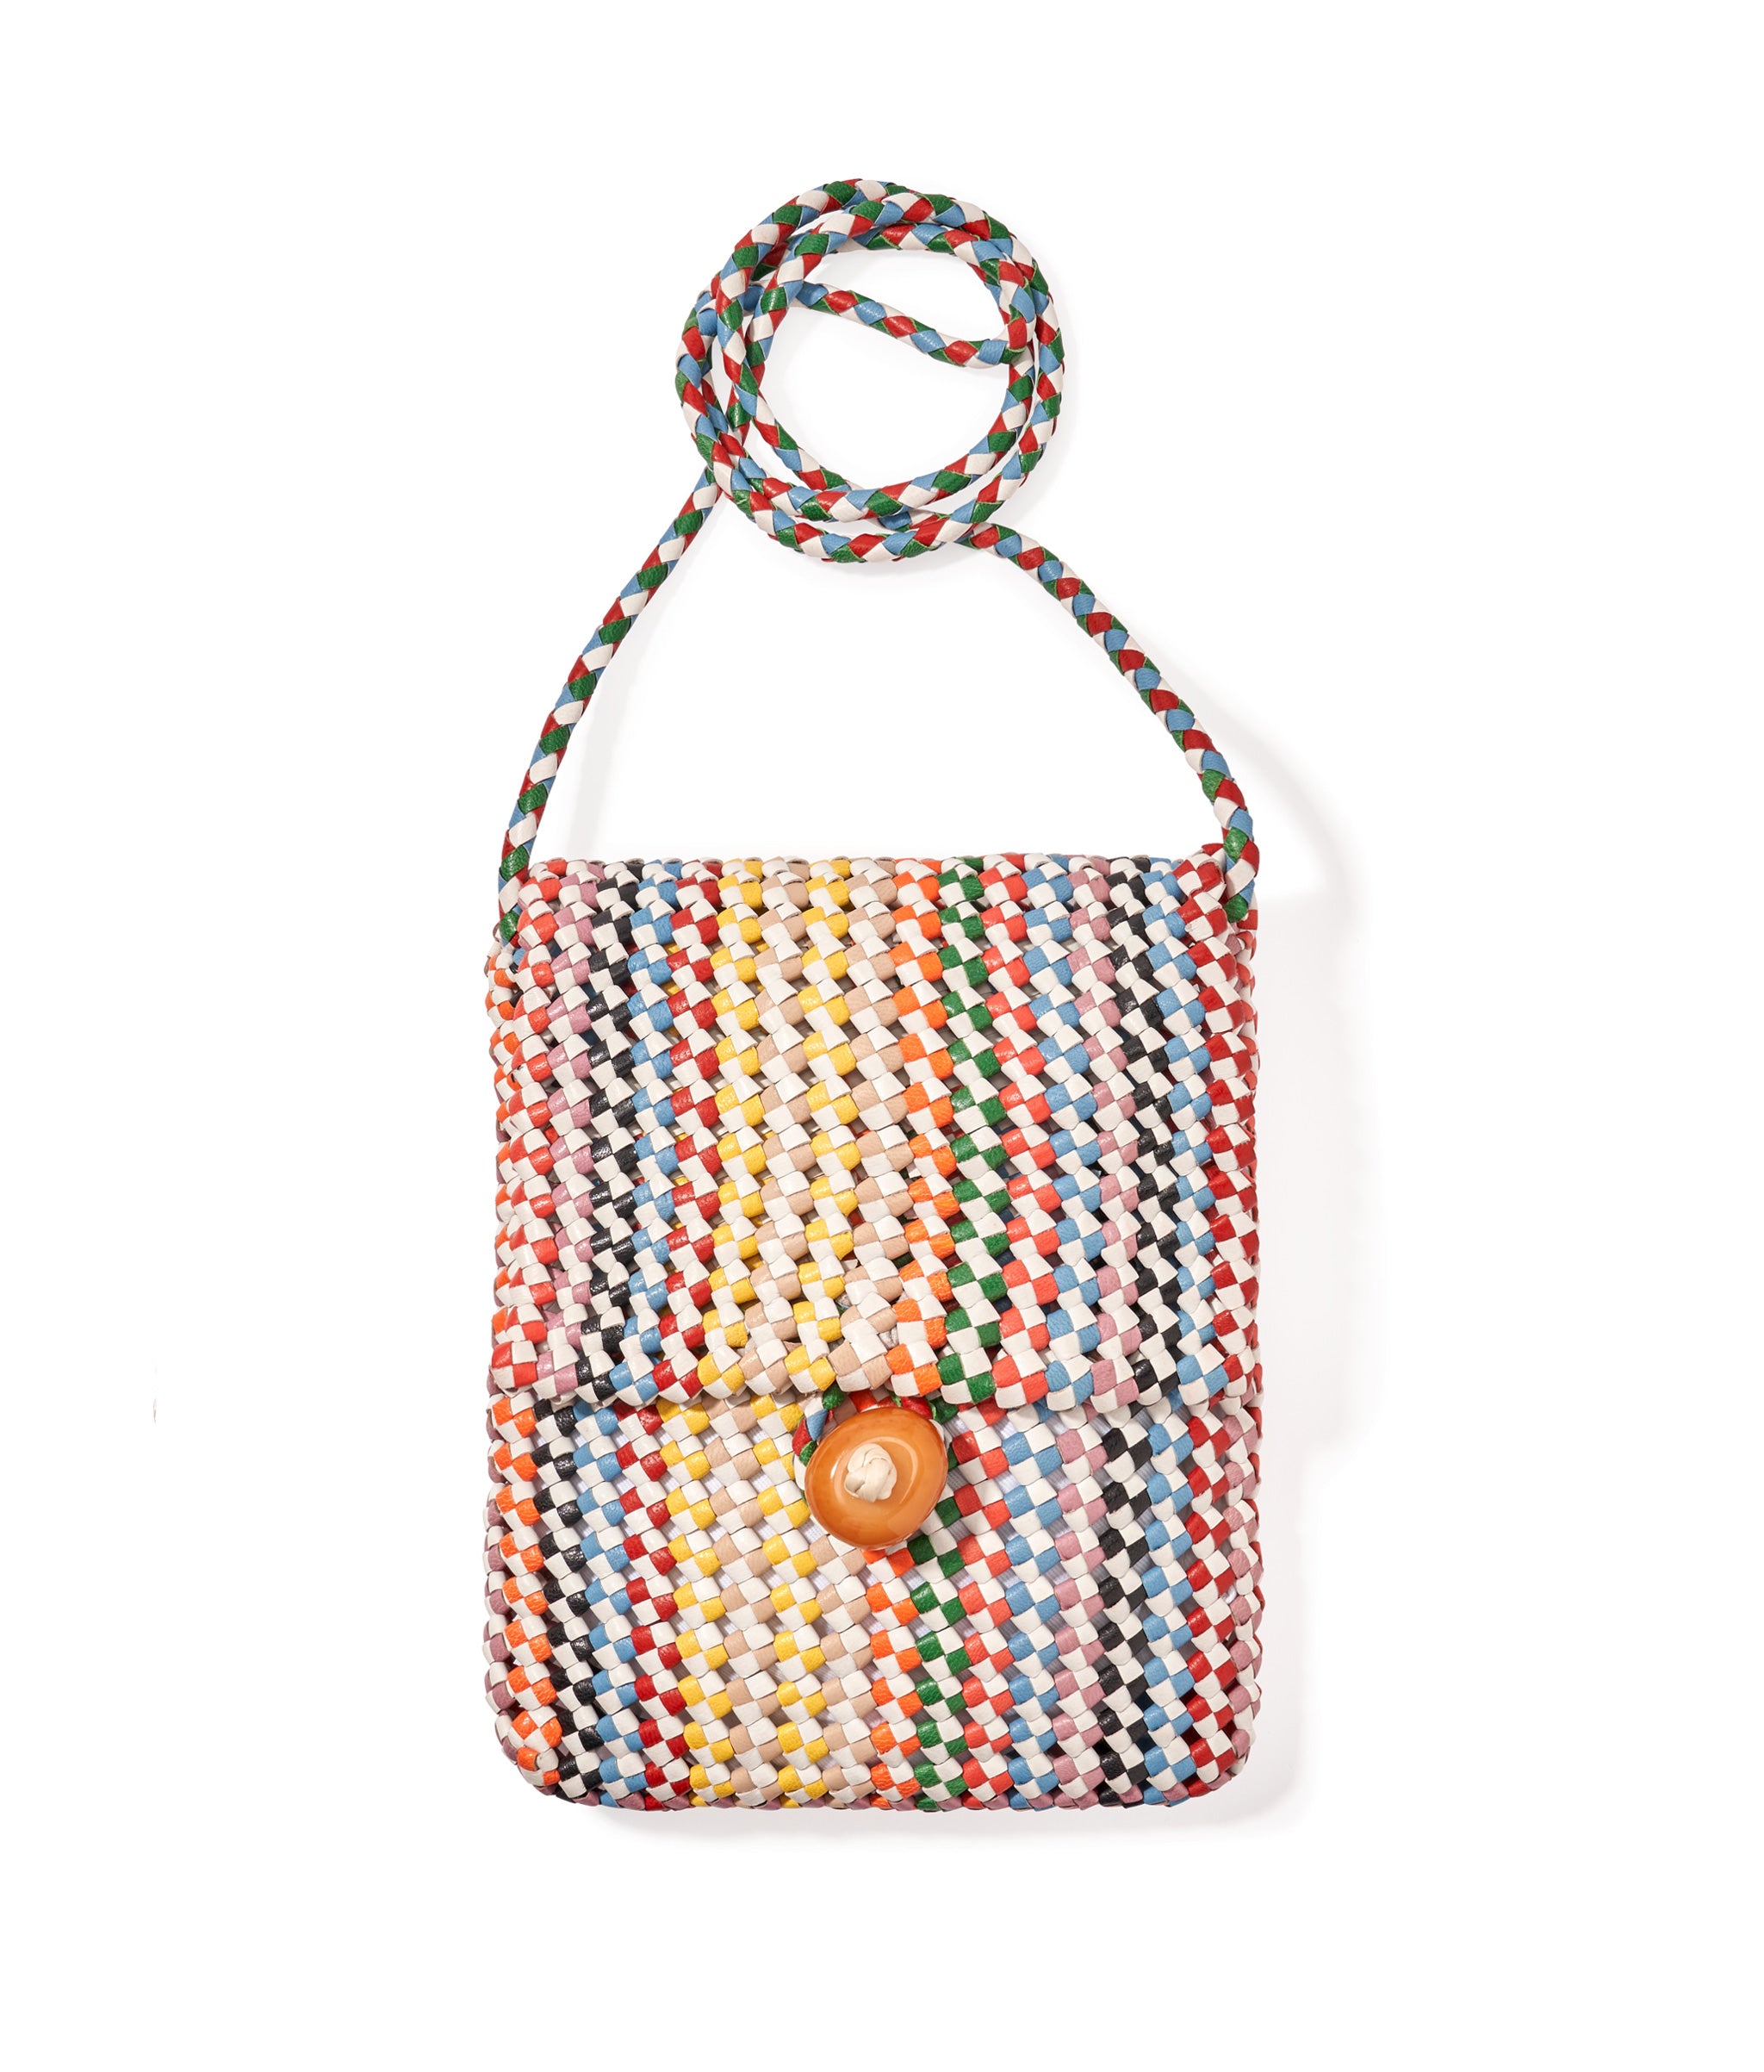 Goa Crossbody. Woven Leather crossbody bag with light cream multicolor stripes and an oversized resin bead closure.